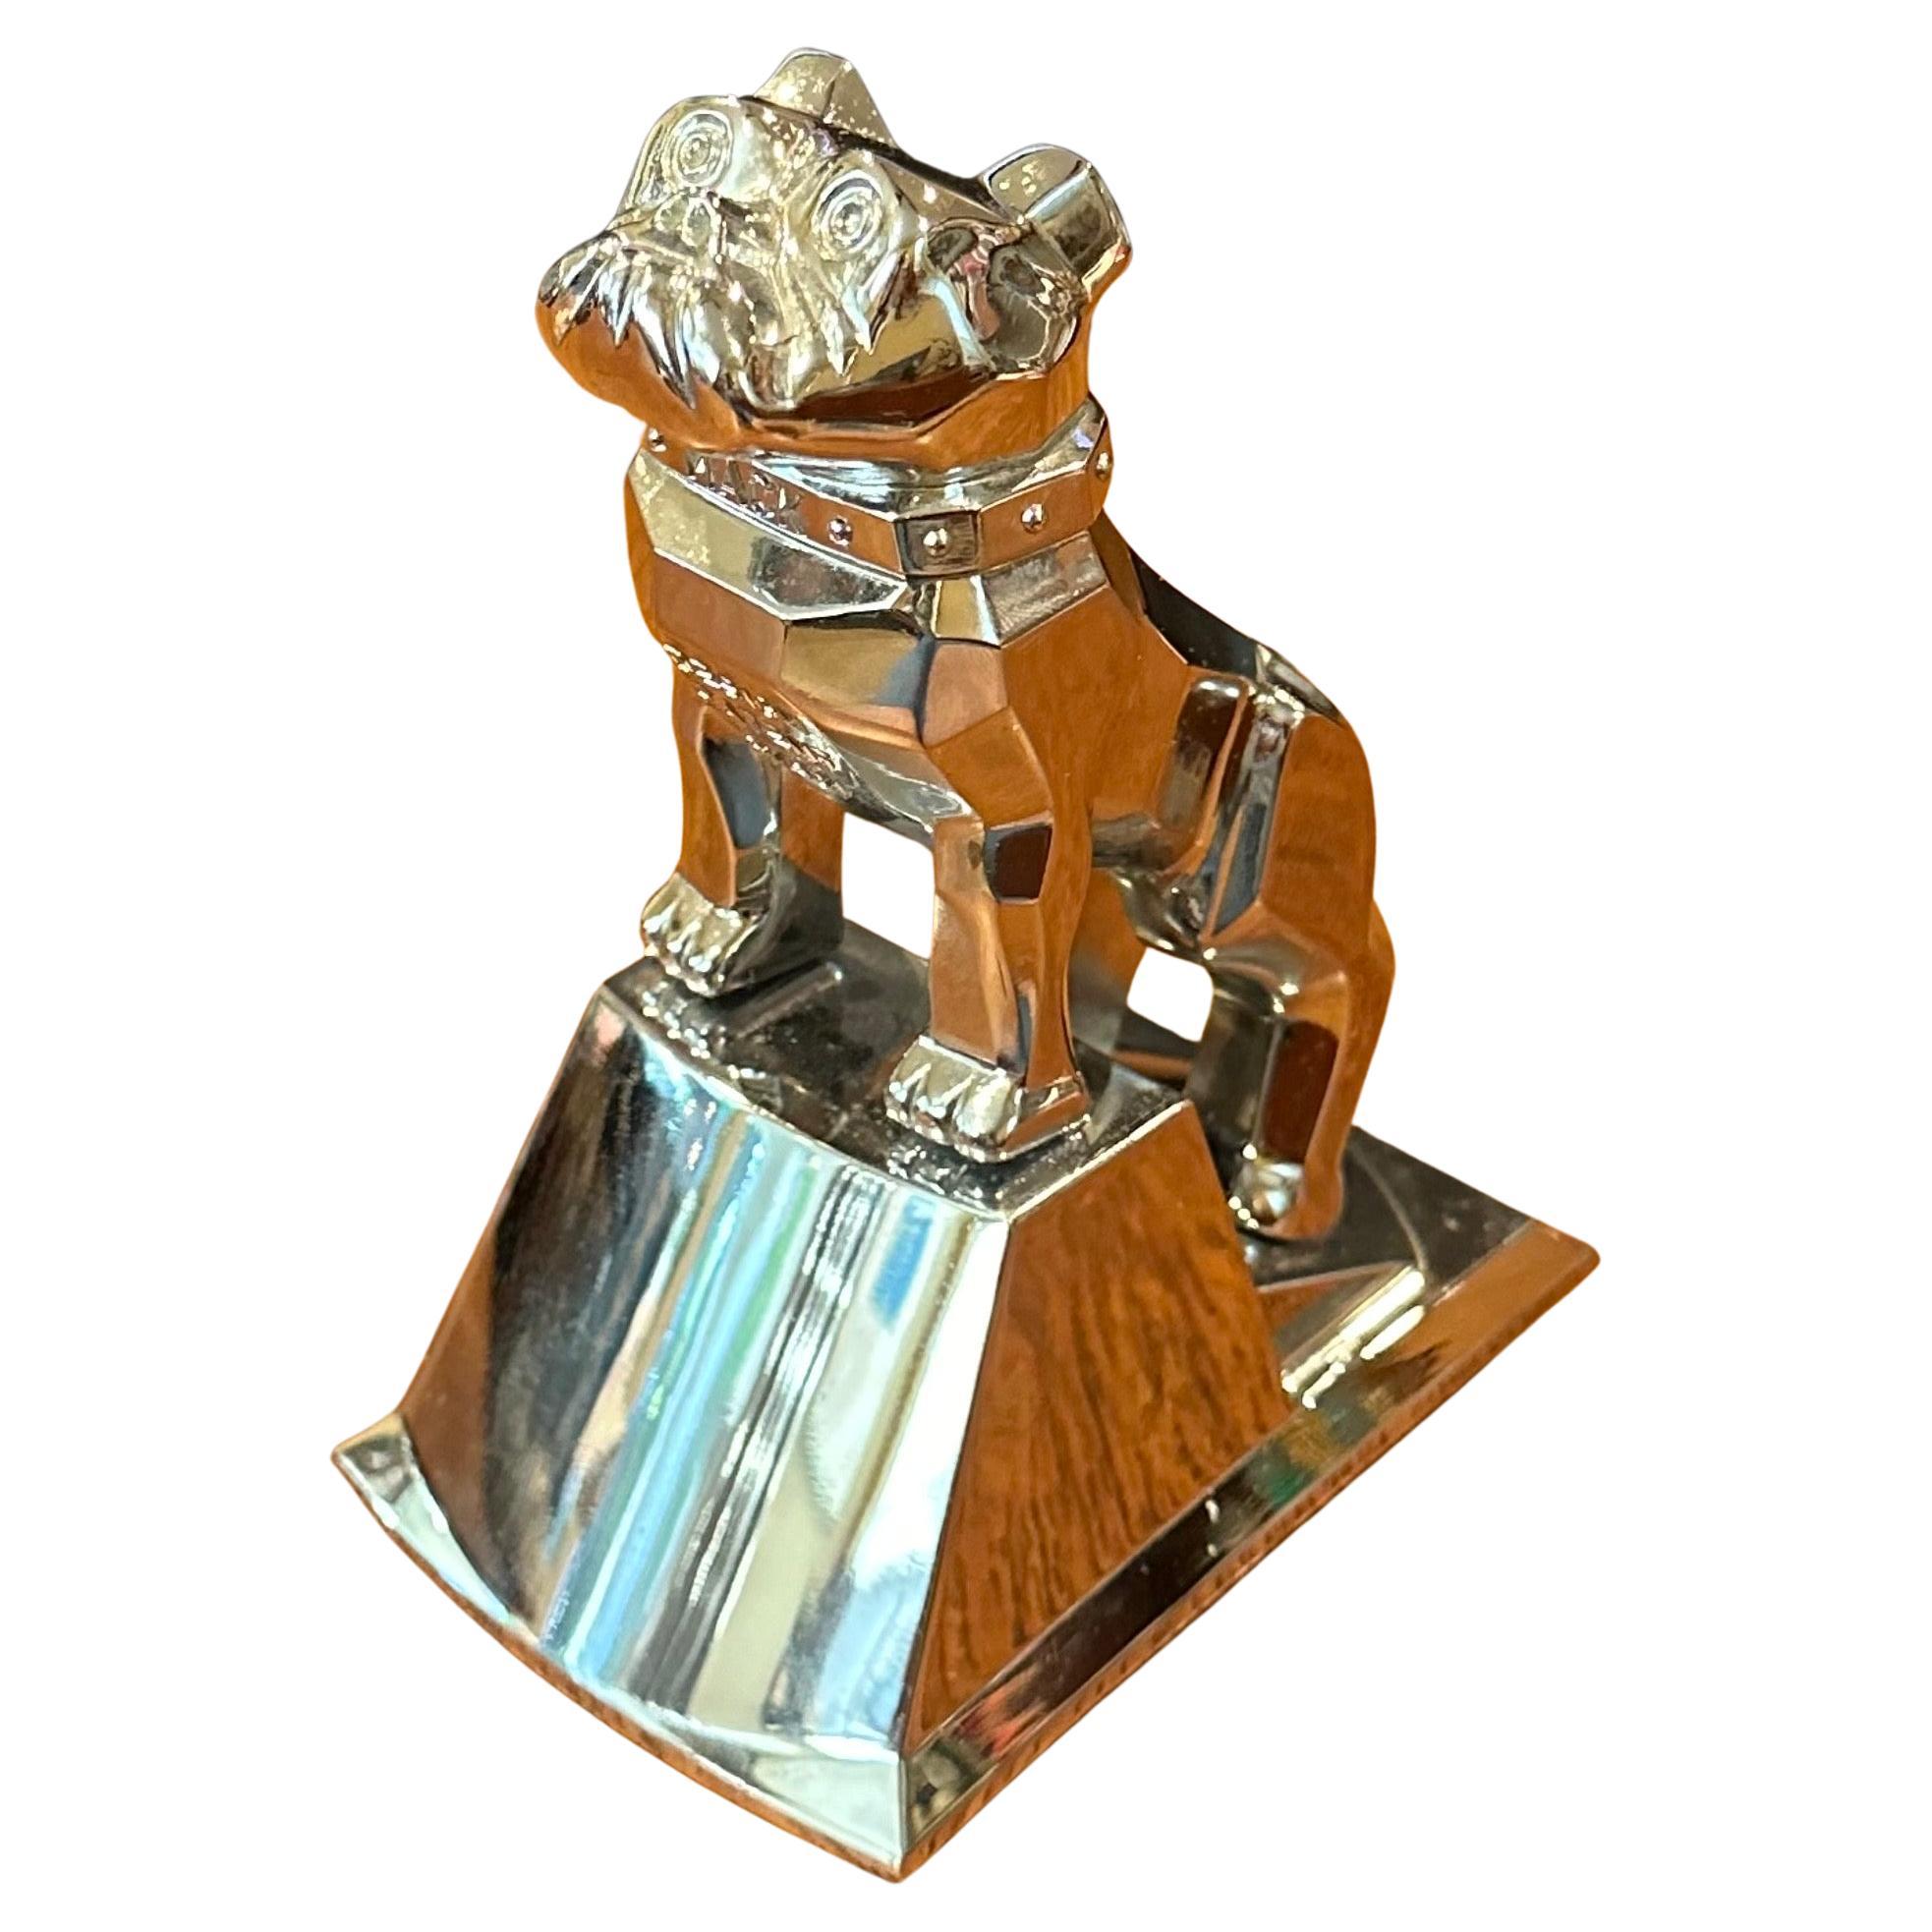 A very cool vintage Mack Truck bulldog chrome hood ornament / sculpture with mounting base, circa 1970s. The piece is in very good vintage condition and measures 3